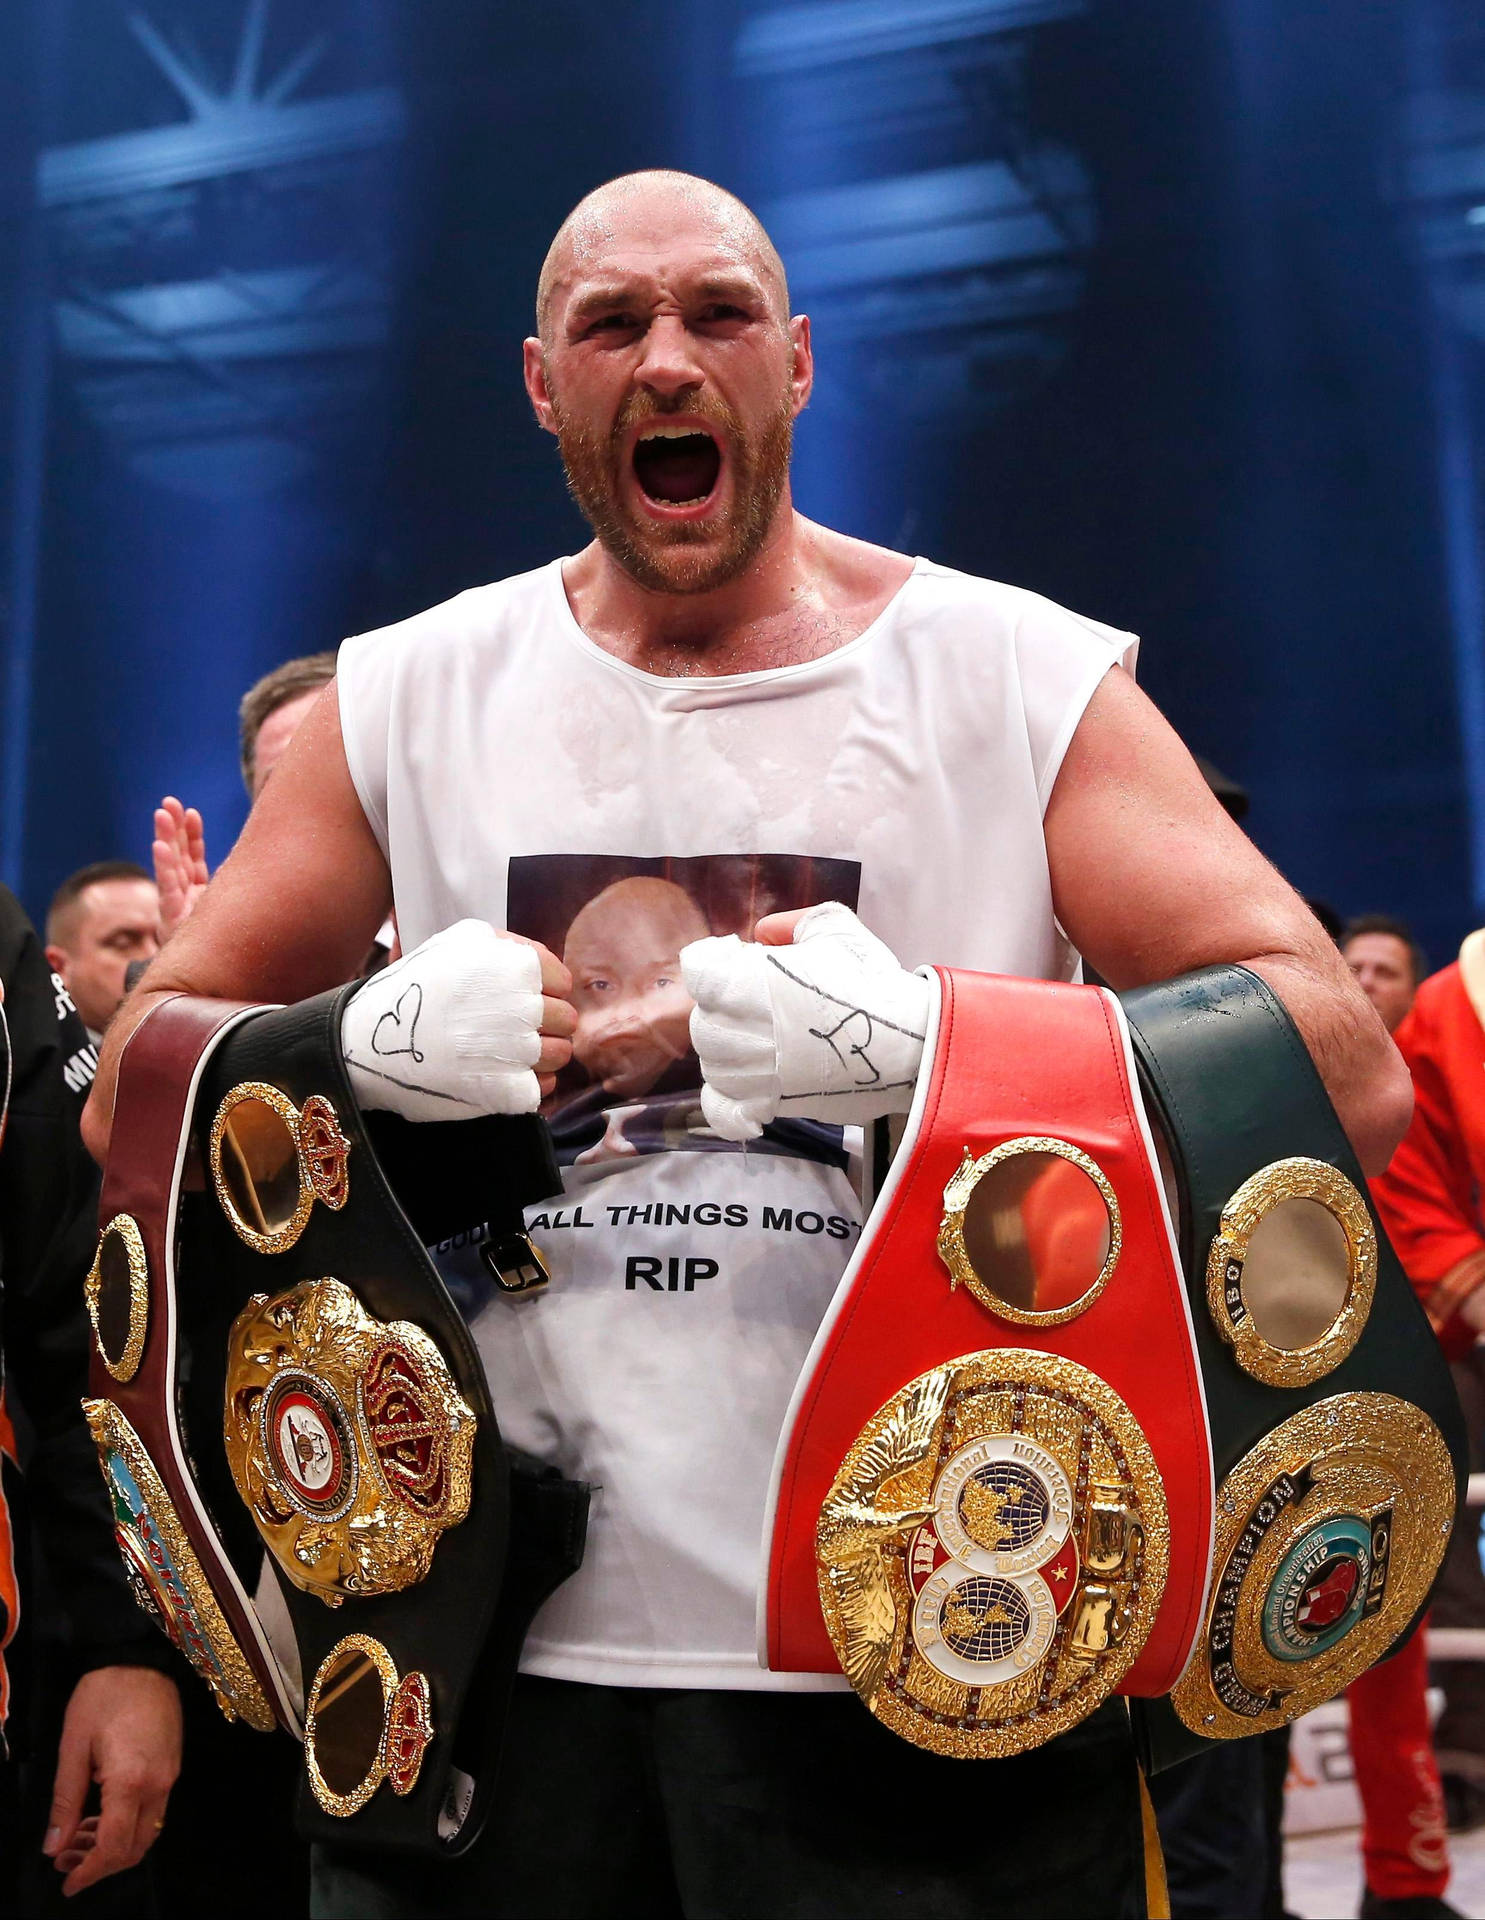 Download Free Tyson Fury Wallpaper Discover more Boxer Deontay Wilder  Heavyweight Champion Tyson Fury wallpaper  Tyson fury Boxing images  Fury